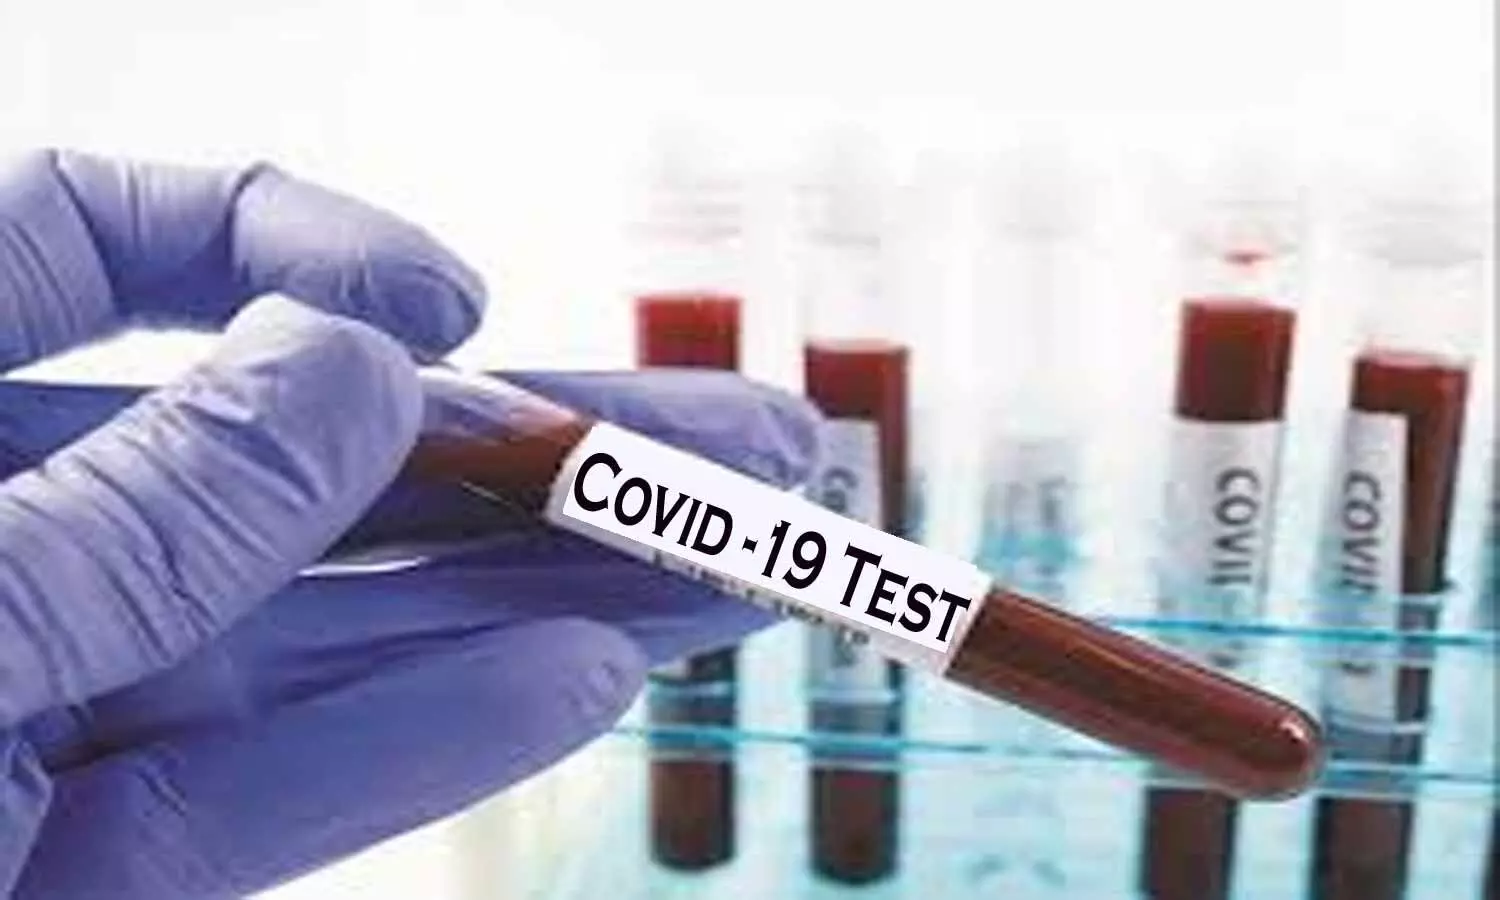 RT-PCR test material can be provided to private labs at reasonable cost: Govt tells Kerala HC